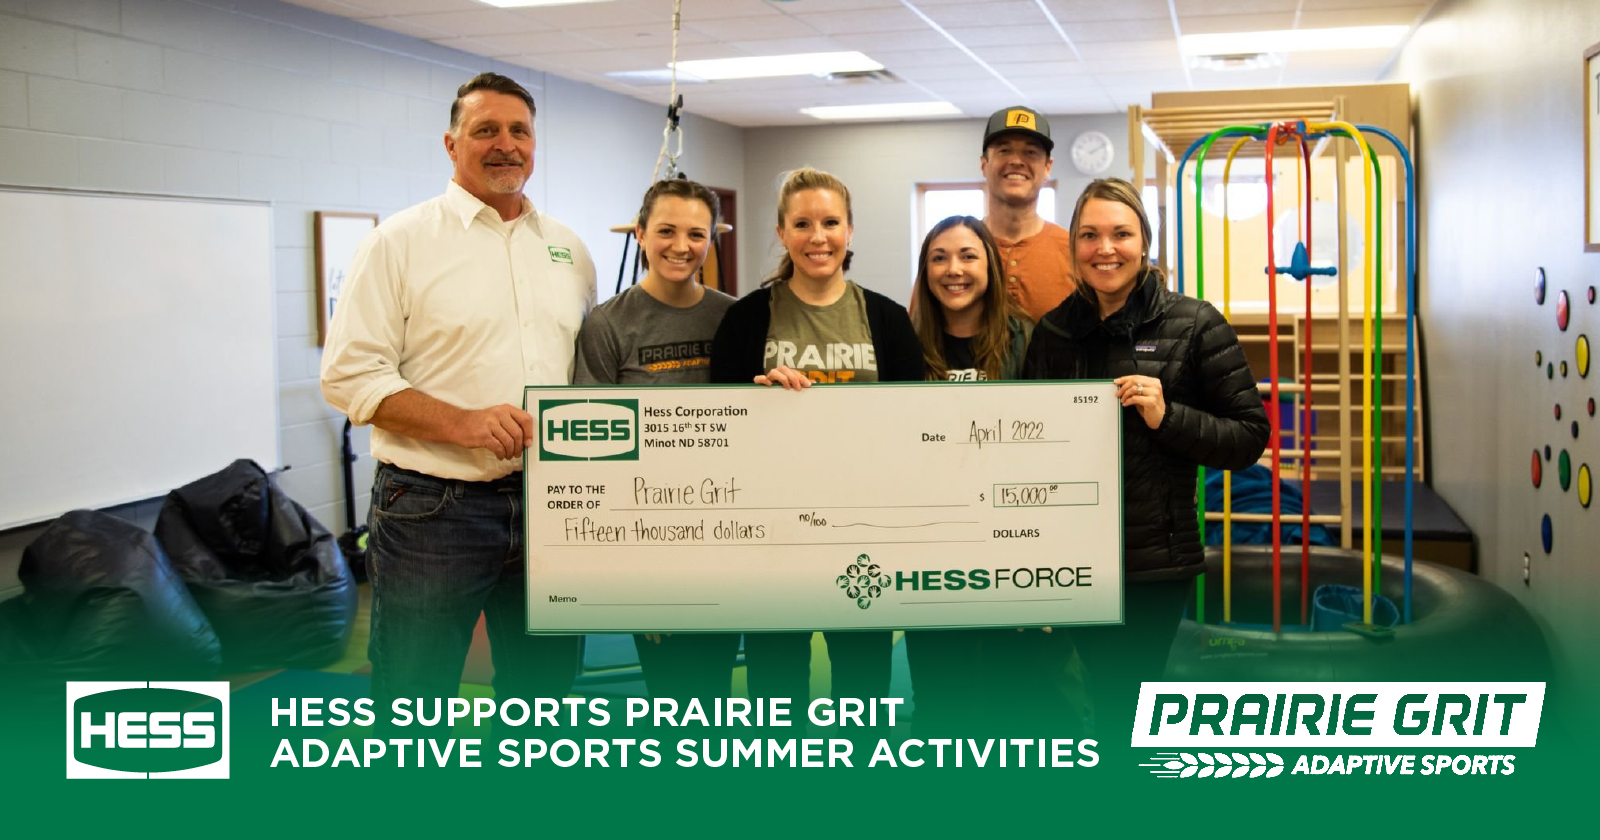 Hess Supports Prairie Grit Adaptive Sports Summer Activities